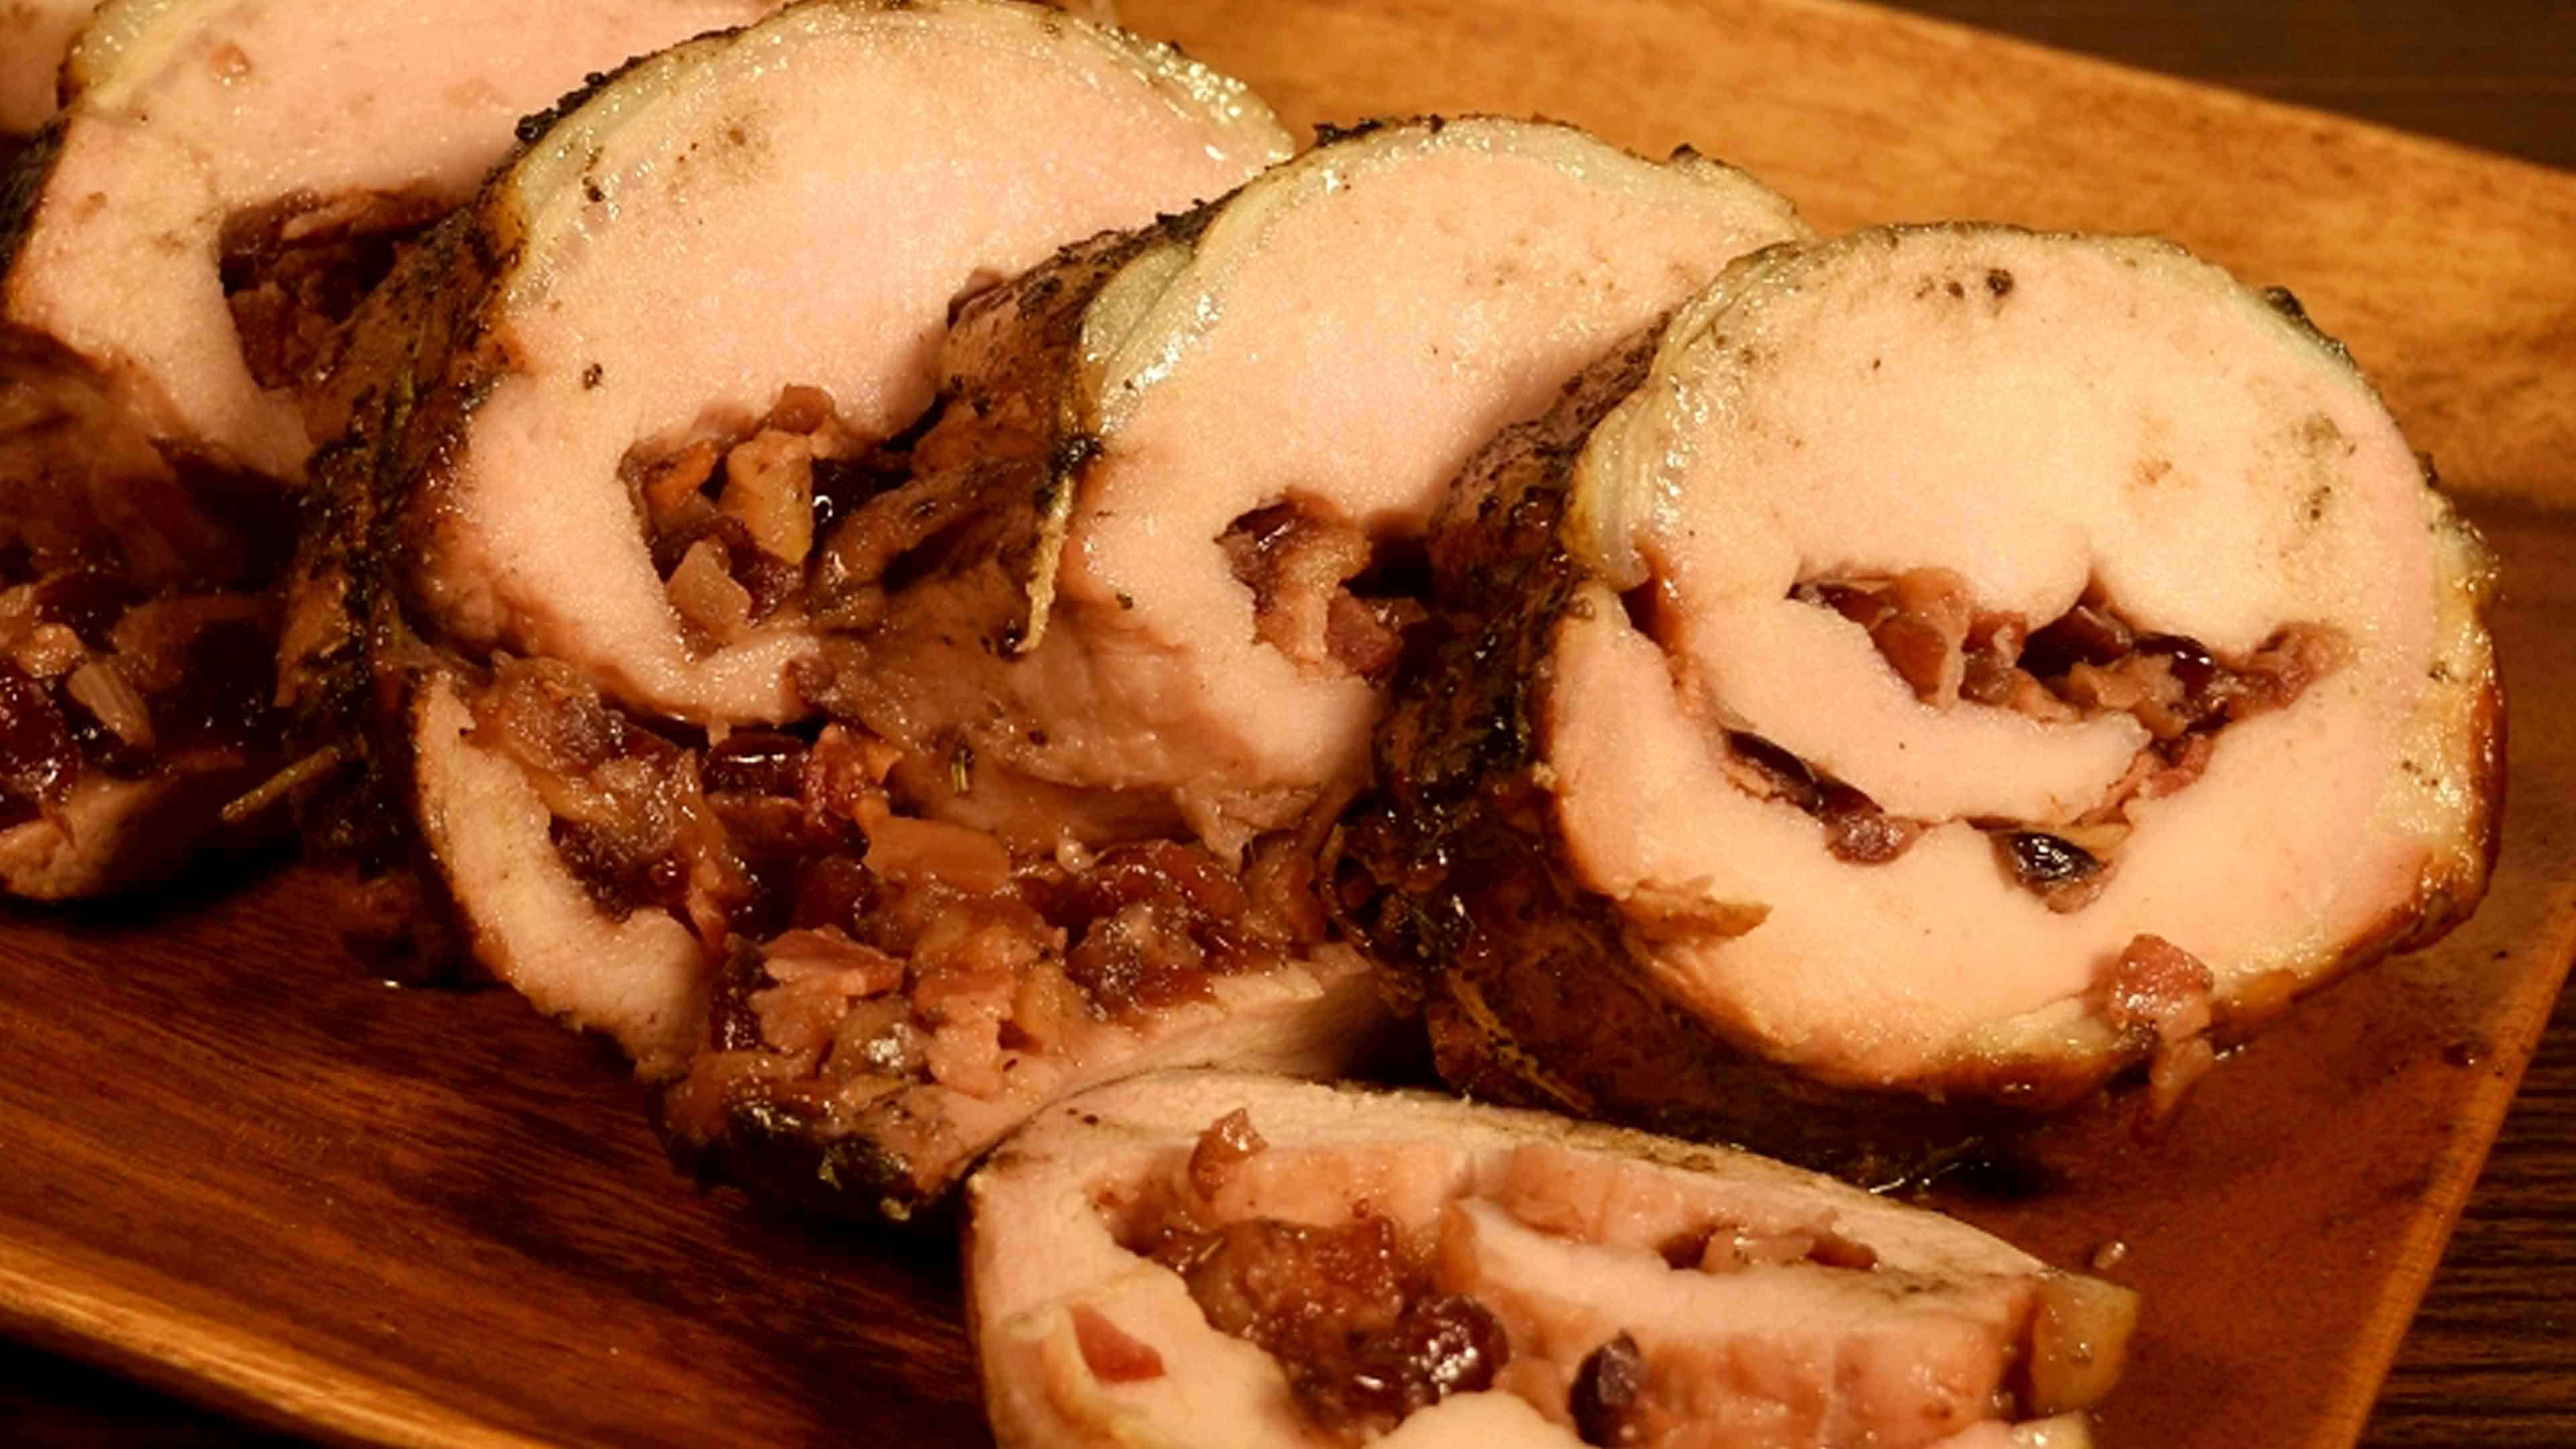 Pork loin stuffed with bacon and apples